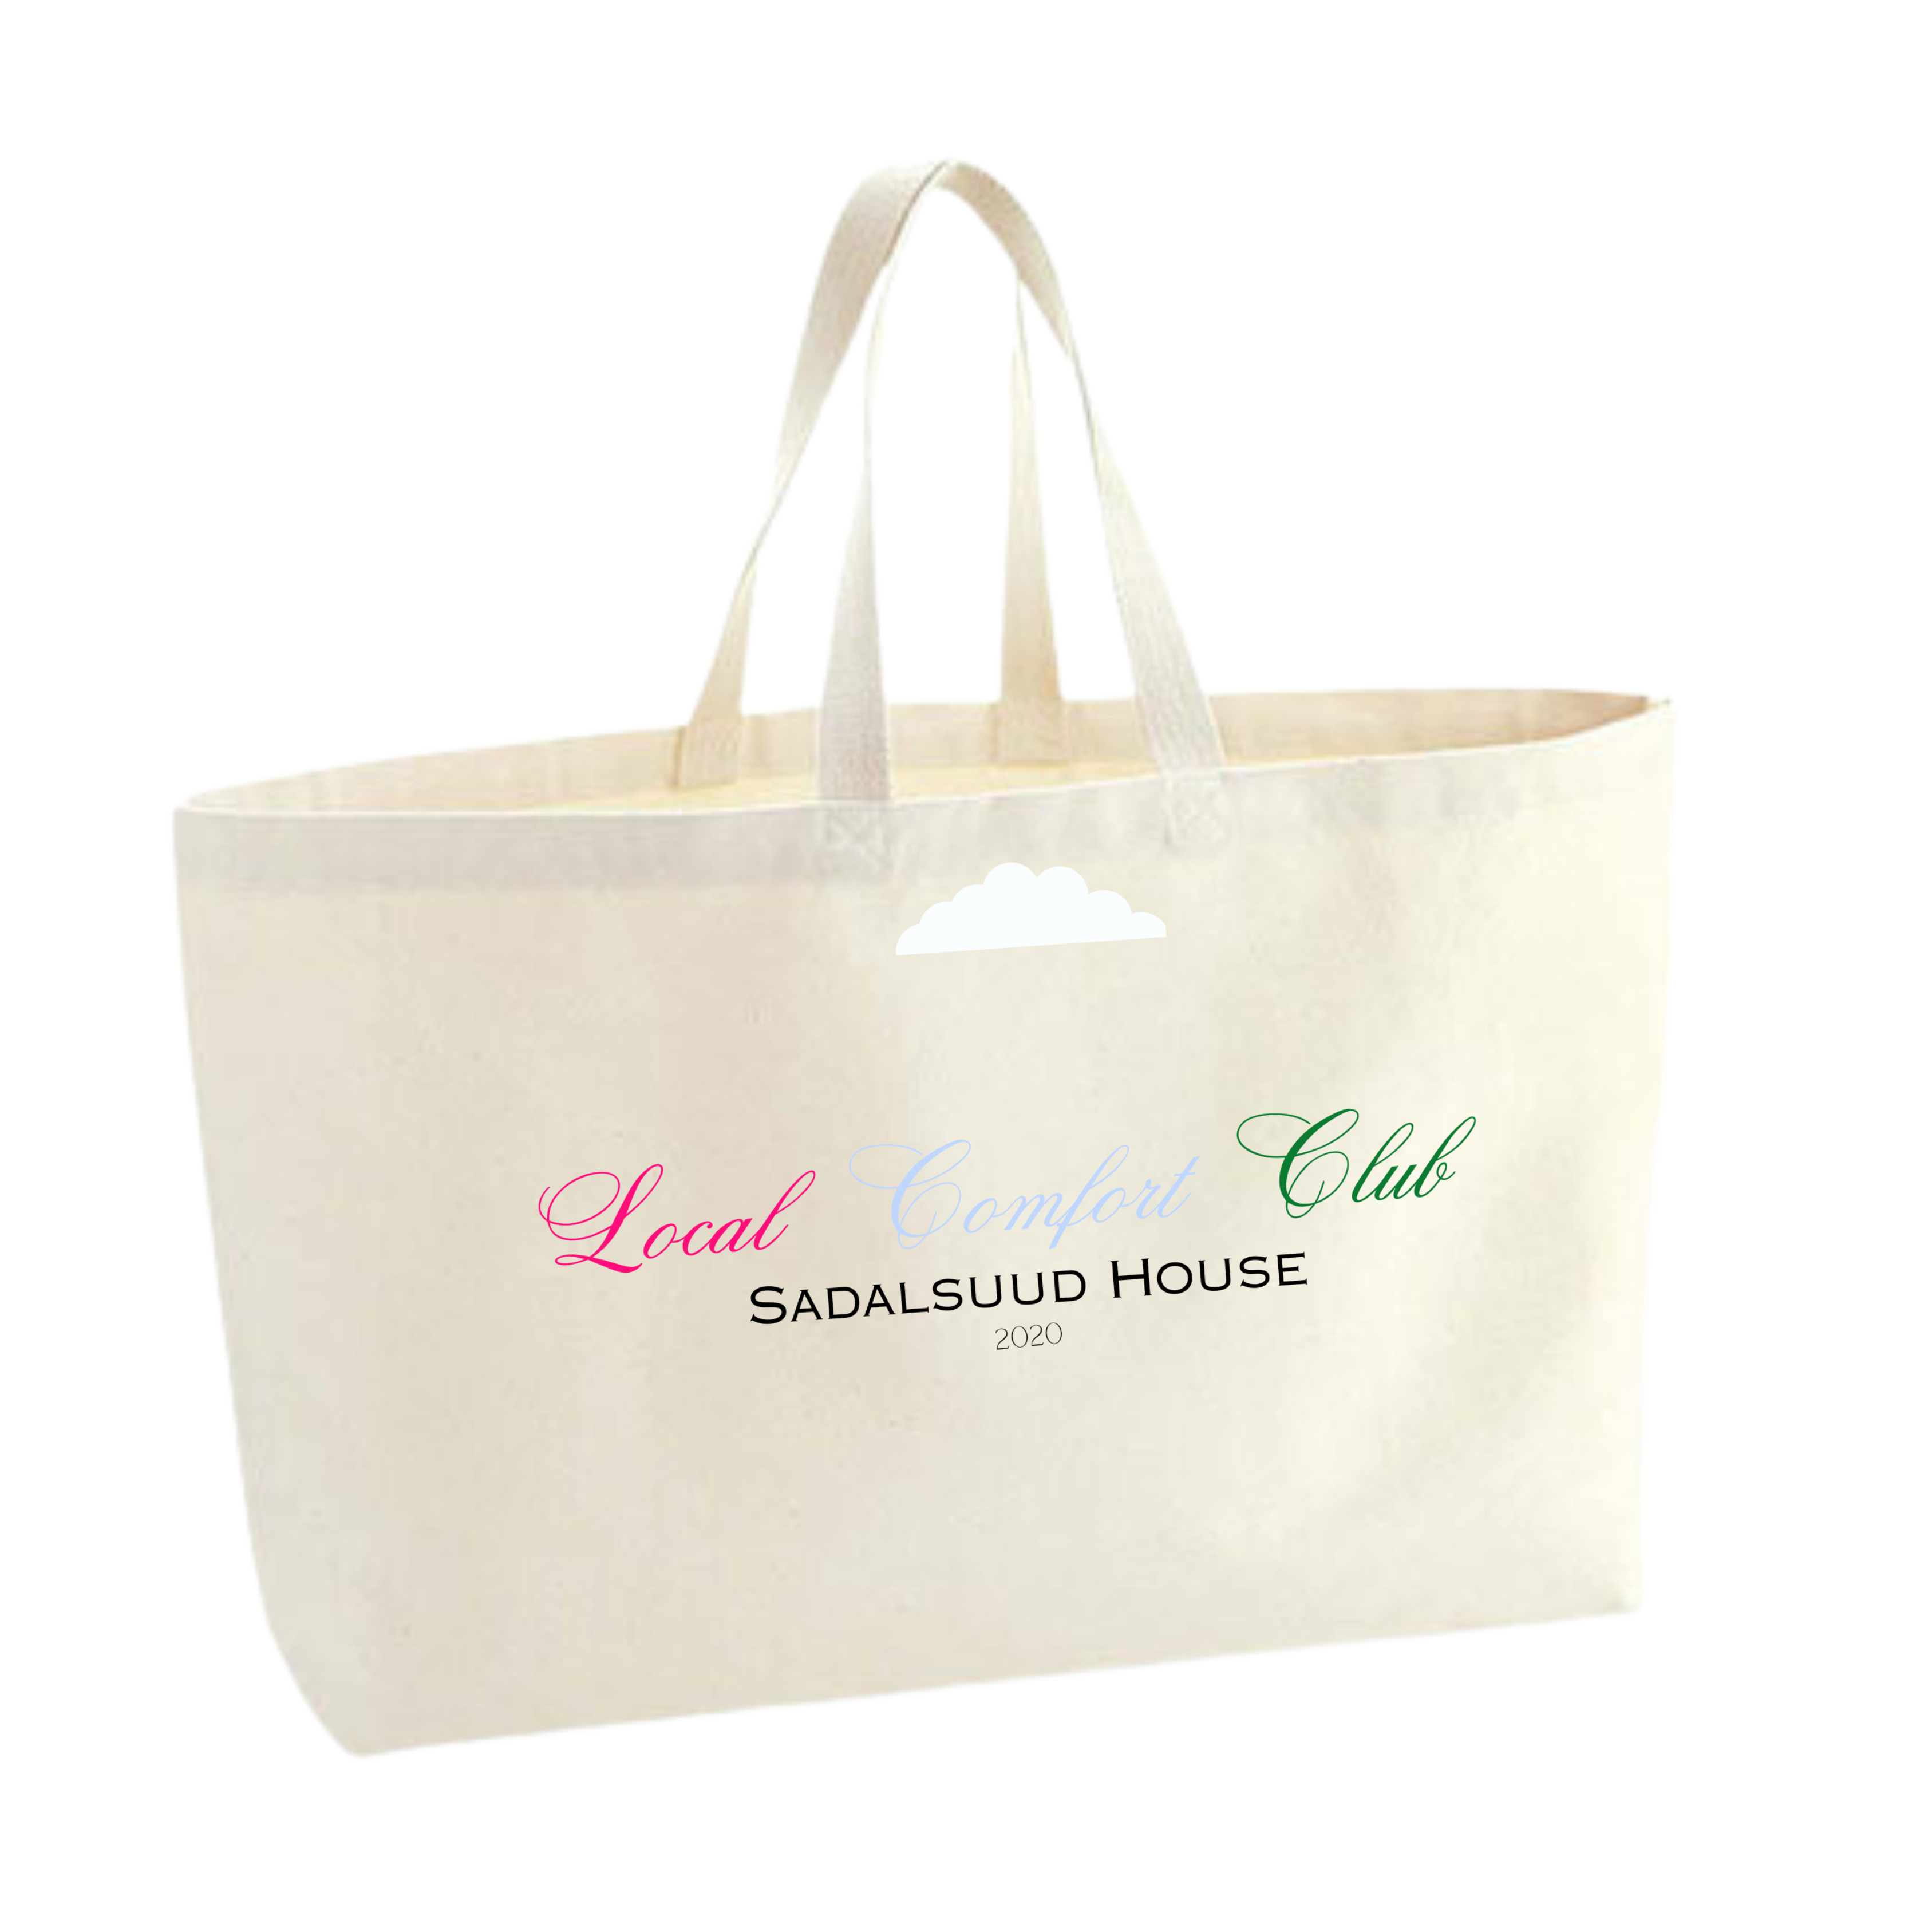 Products – Sadalsuud House